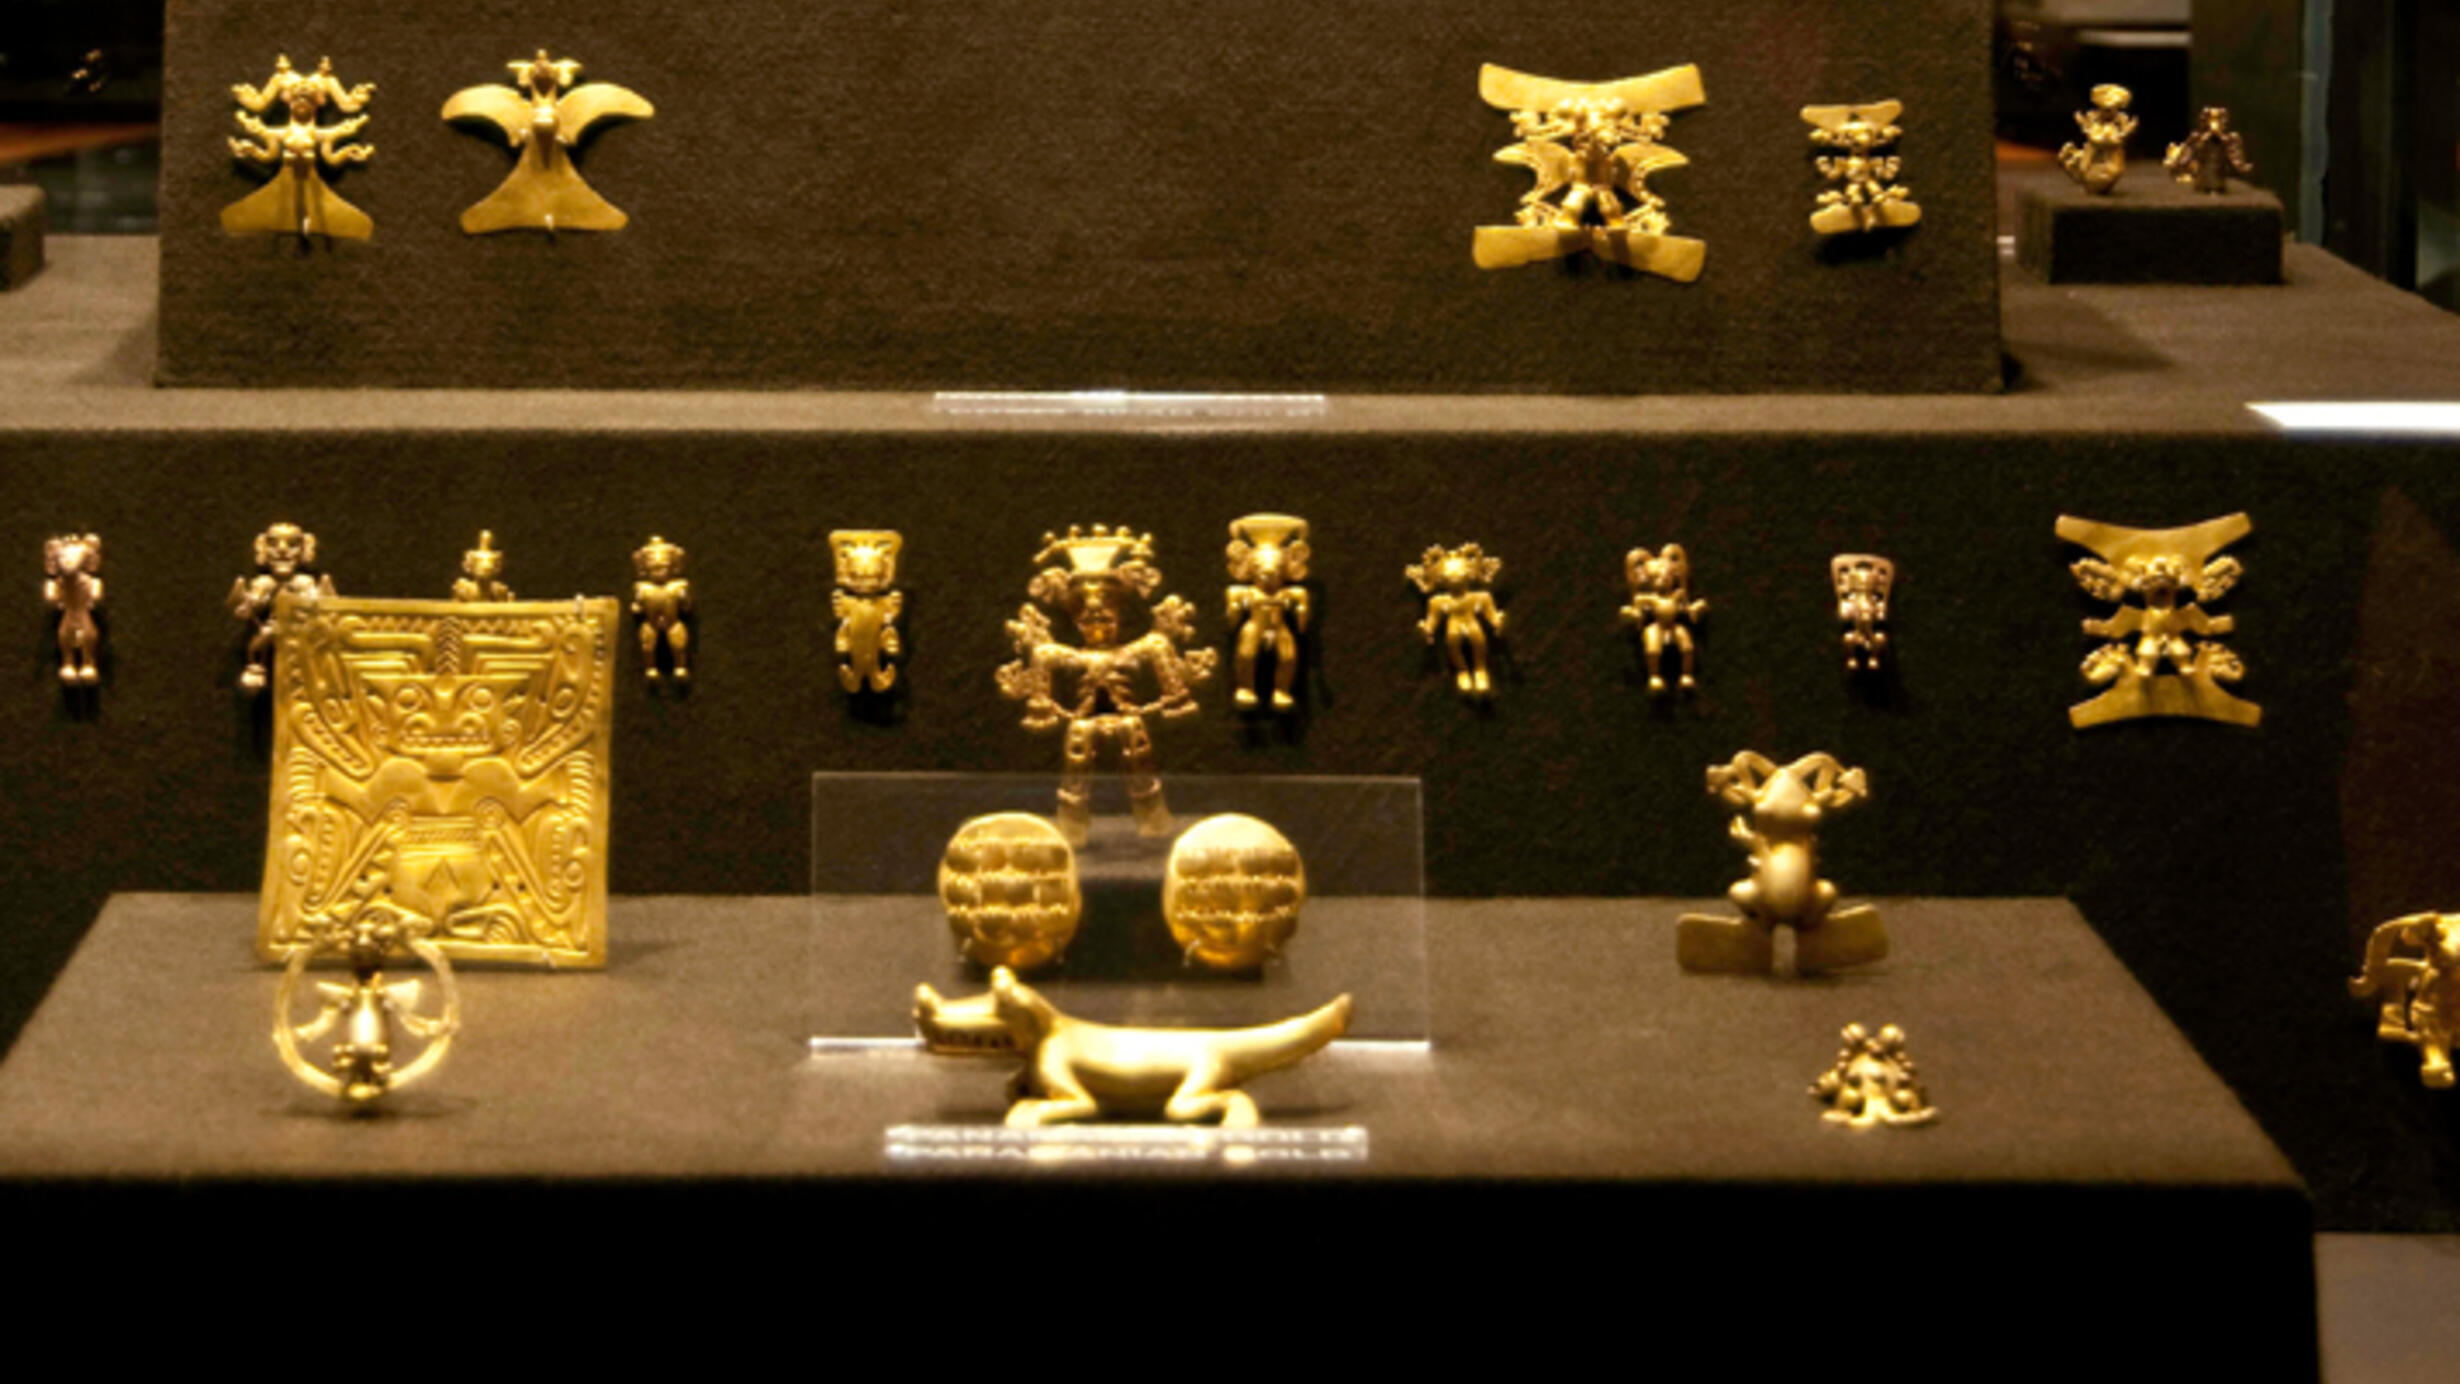 In the Museum’s Hall of Mexico and Central America, an exhibition case with multiple small figurines and articles made from gold.